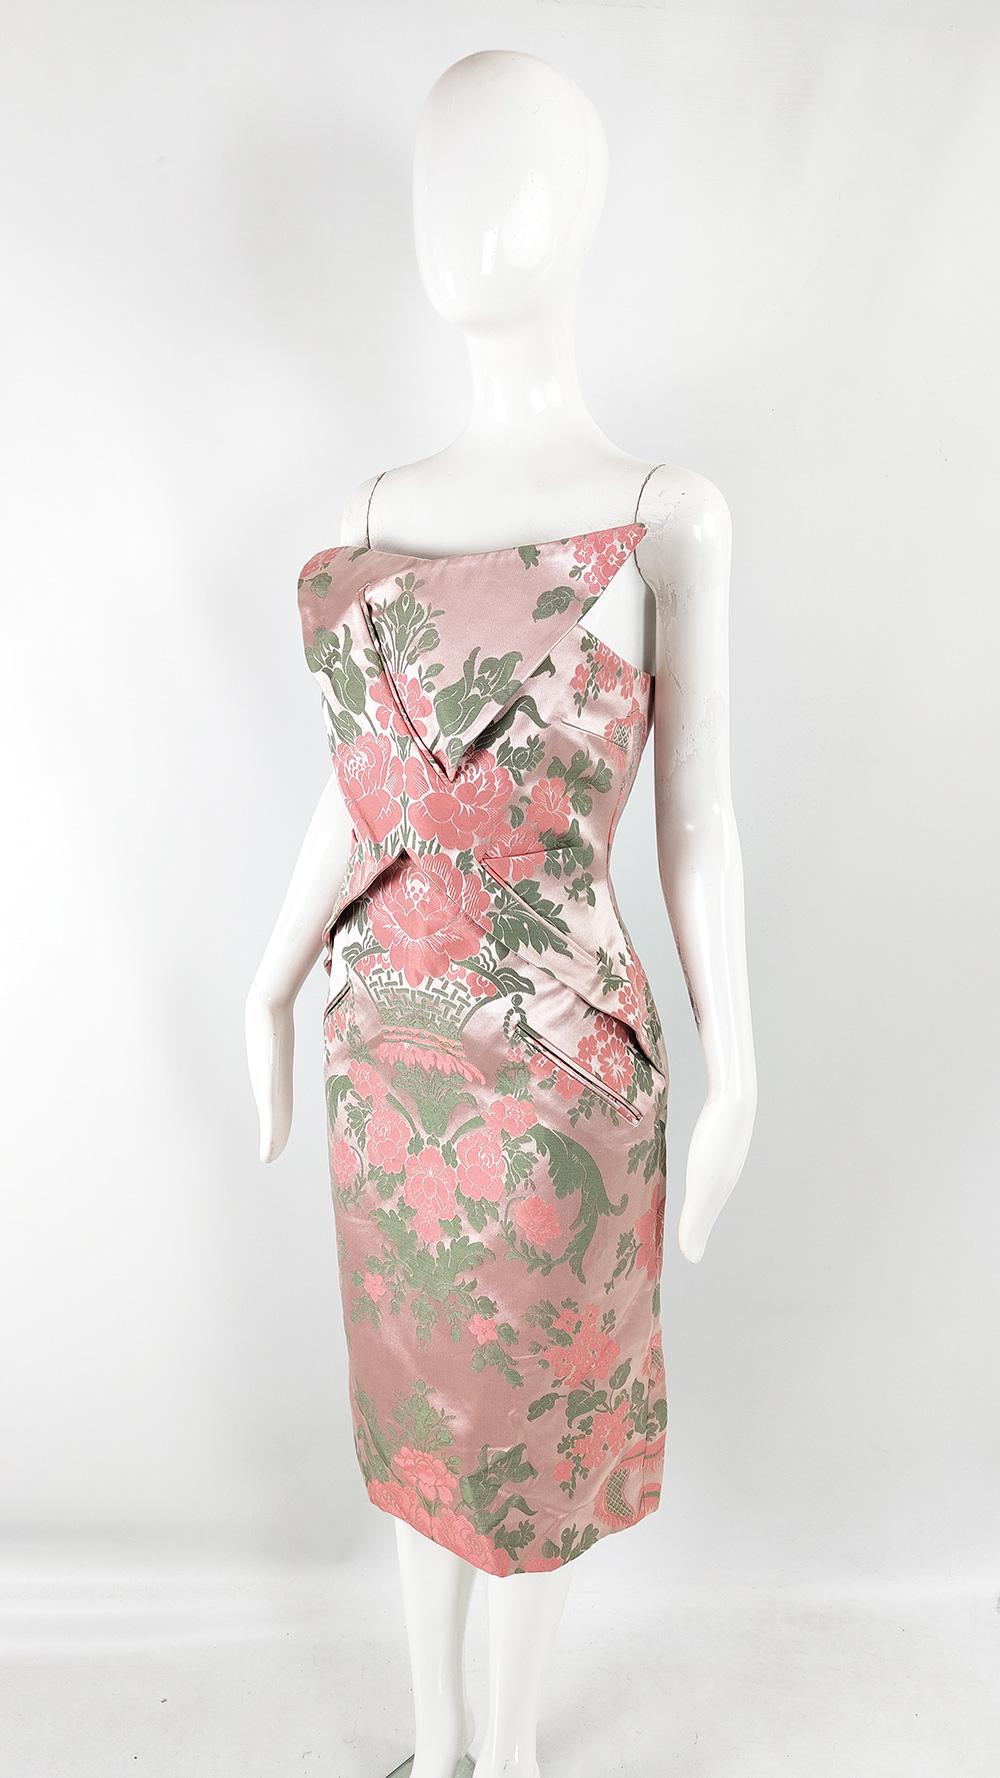 Unworn Christopher Kane Pink Satin Jacquard Brocade Evening Cocktail Party Dress In Excellent Condition For Sale In Doncaster, South Yorkshire